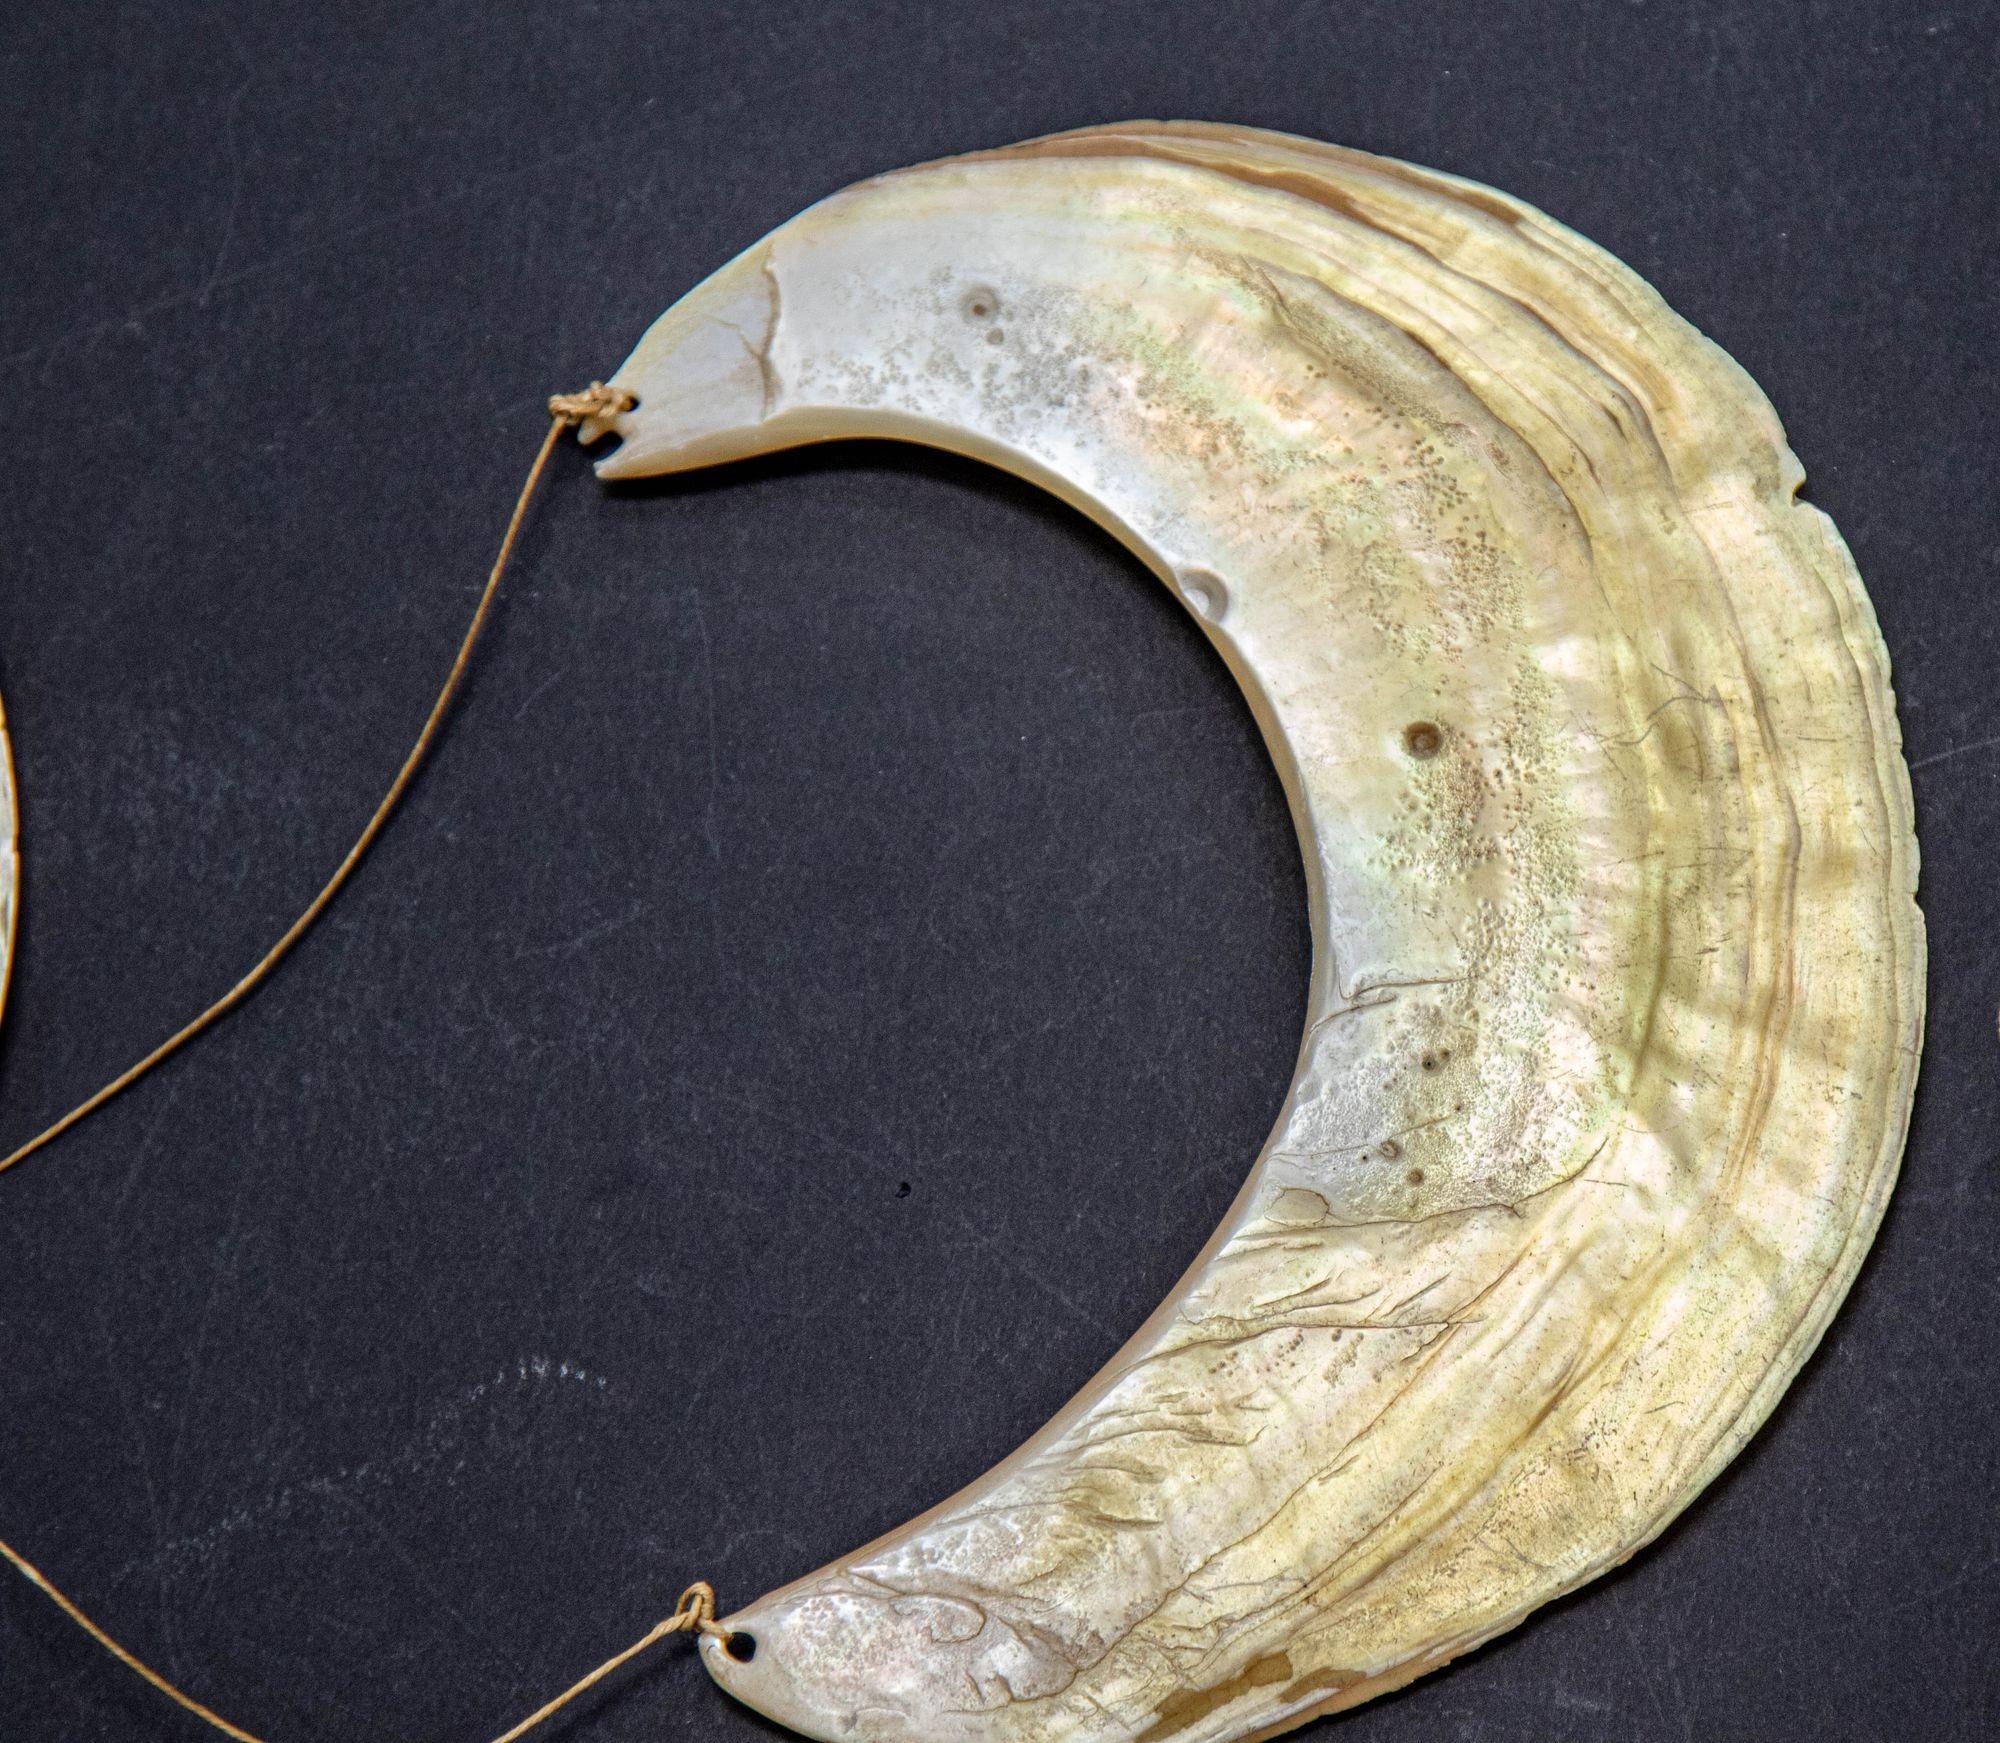 Antique Ethnic Tribal Kina Crescent Shell Necklaces Papua New Guinea Set of 3 In Good Condition For Sale In North Hollywood, CA